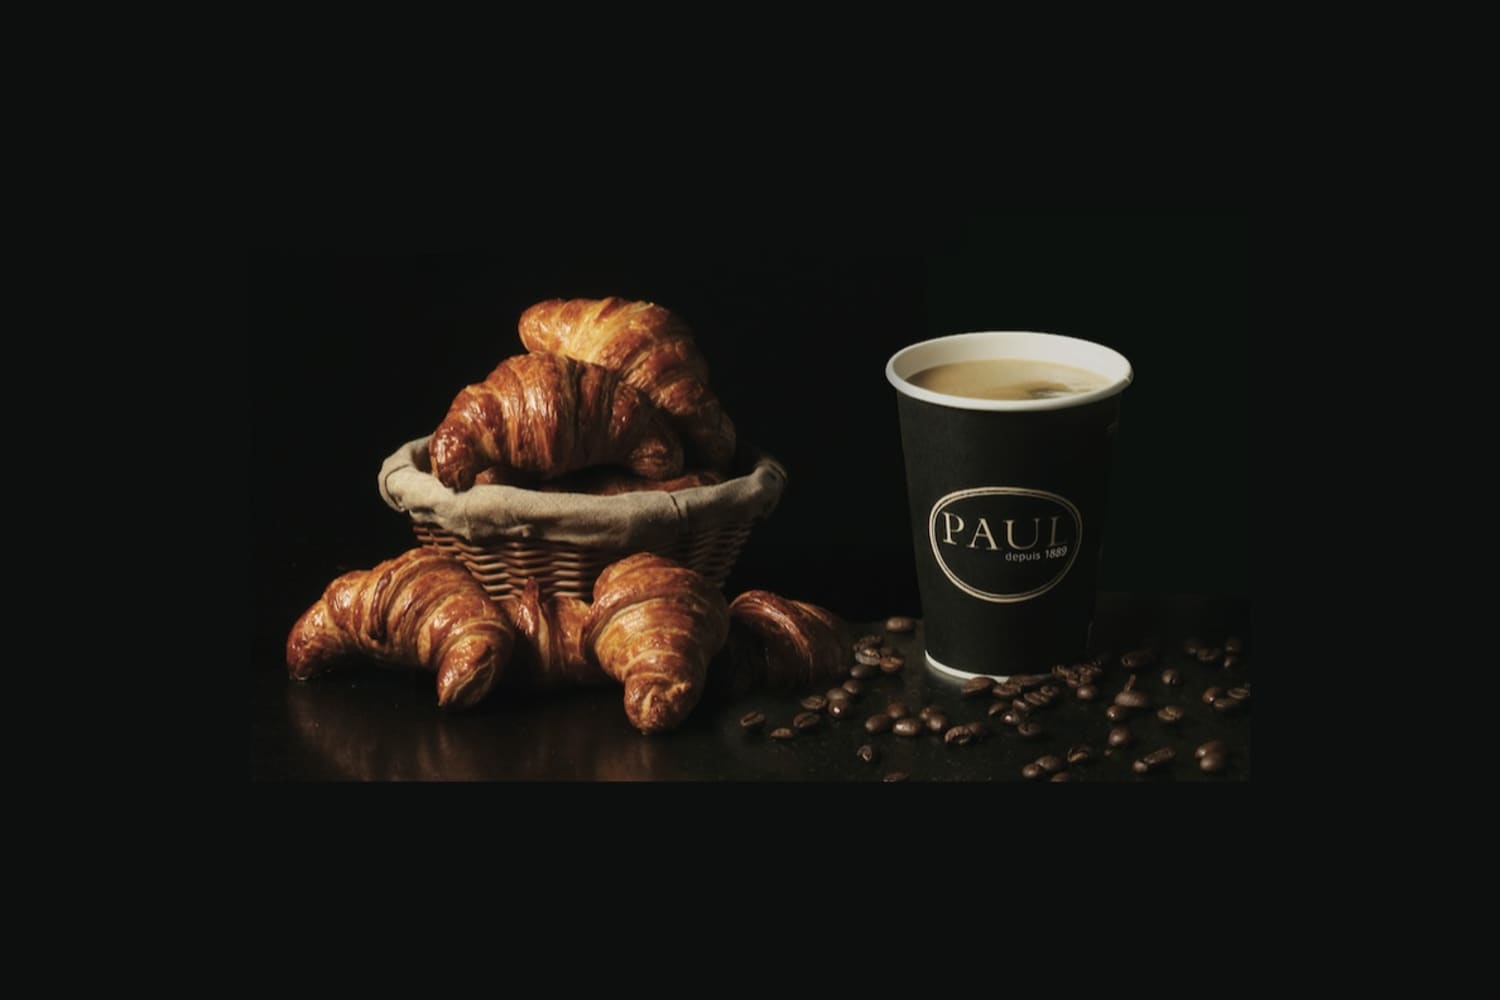 1 x Croissant + Coffee / Tea (Hot) at Paul Bakery - Get Deals, Cashback and Rewards with ShopBack GO